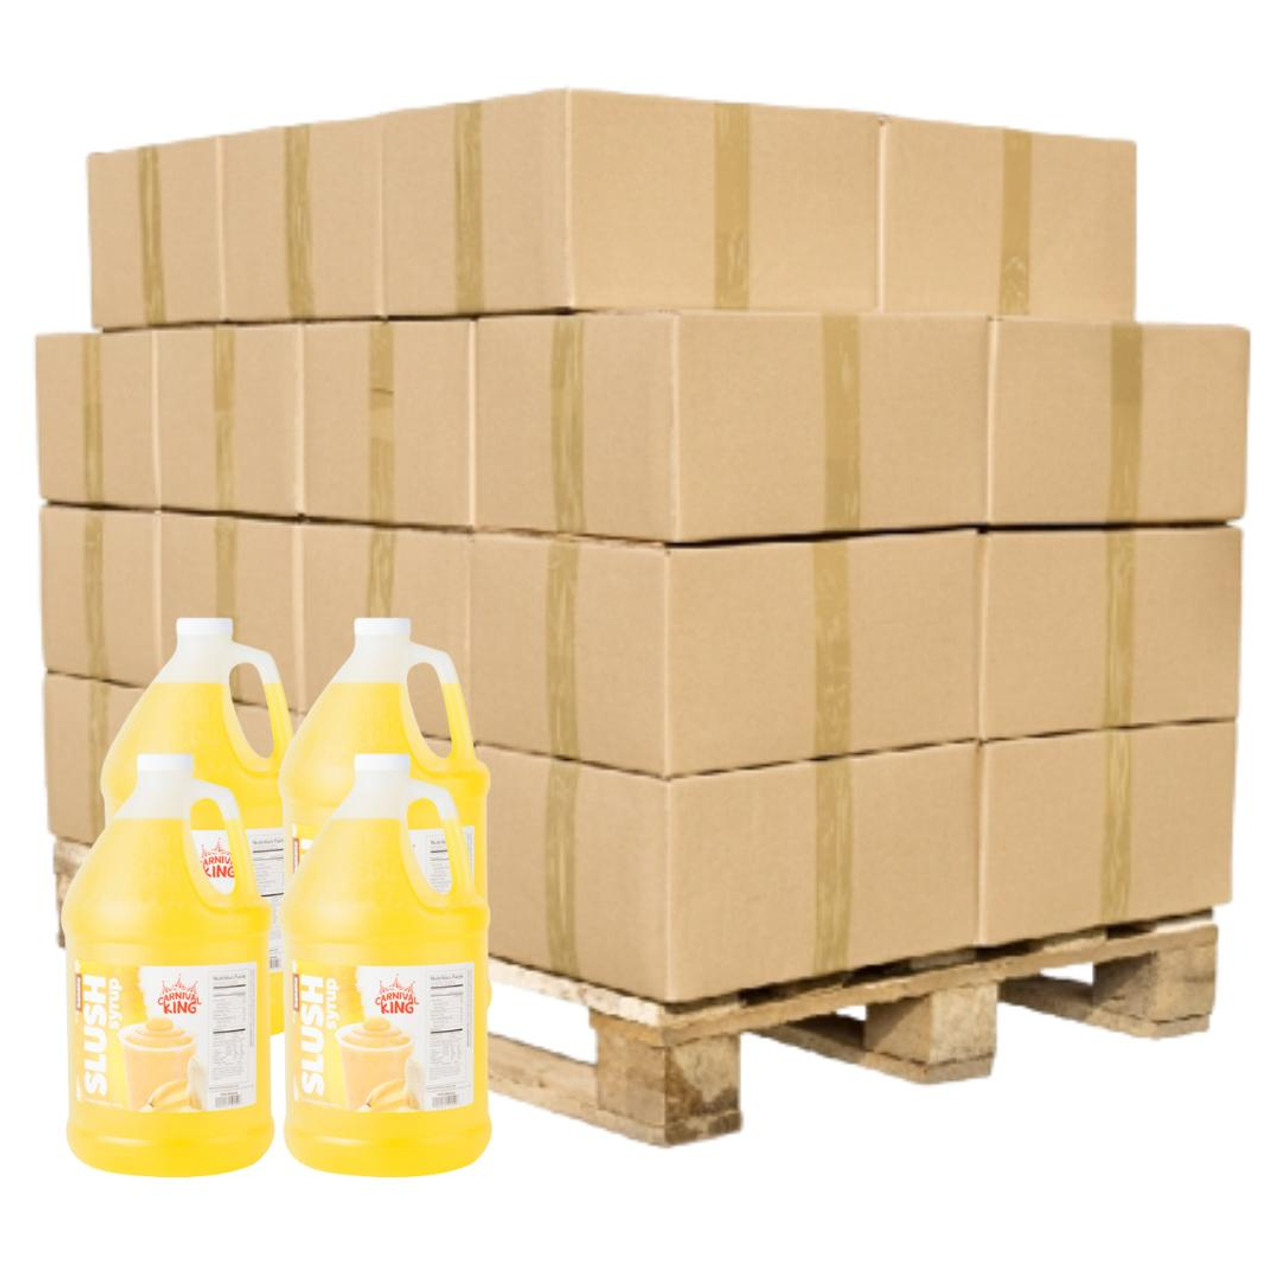 CONCESSION Concession Stand Banana Slushy Syrup 5:1 Bulk Food Service Concentrate | 1 Gallon | 4/case | 48 Cases Per Pallet (192 Gallons) 